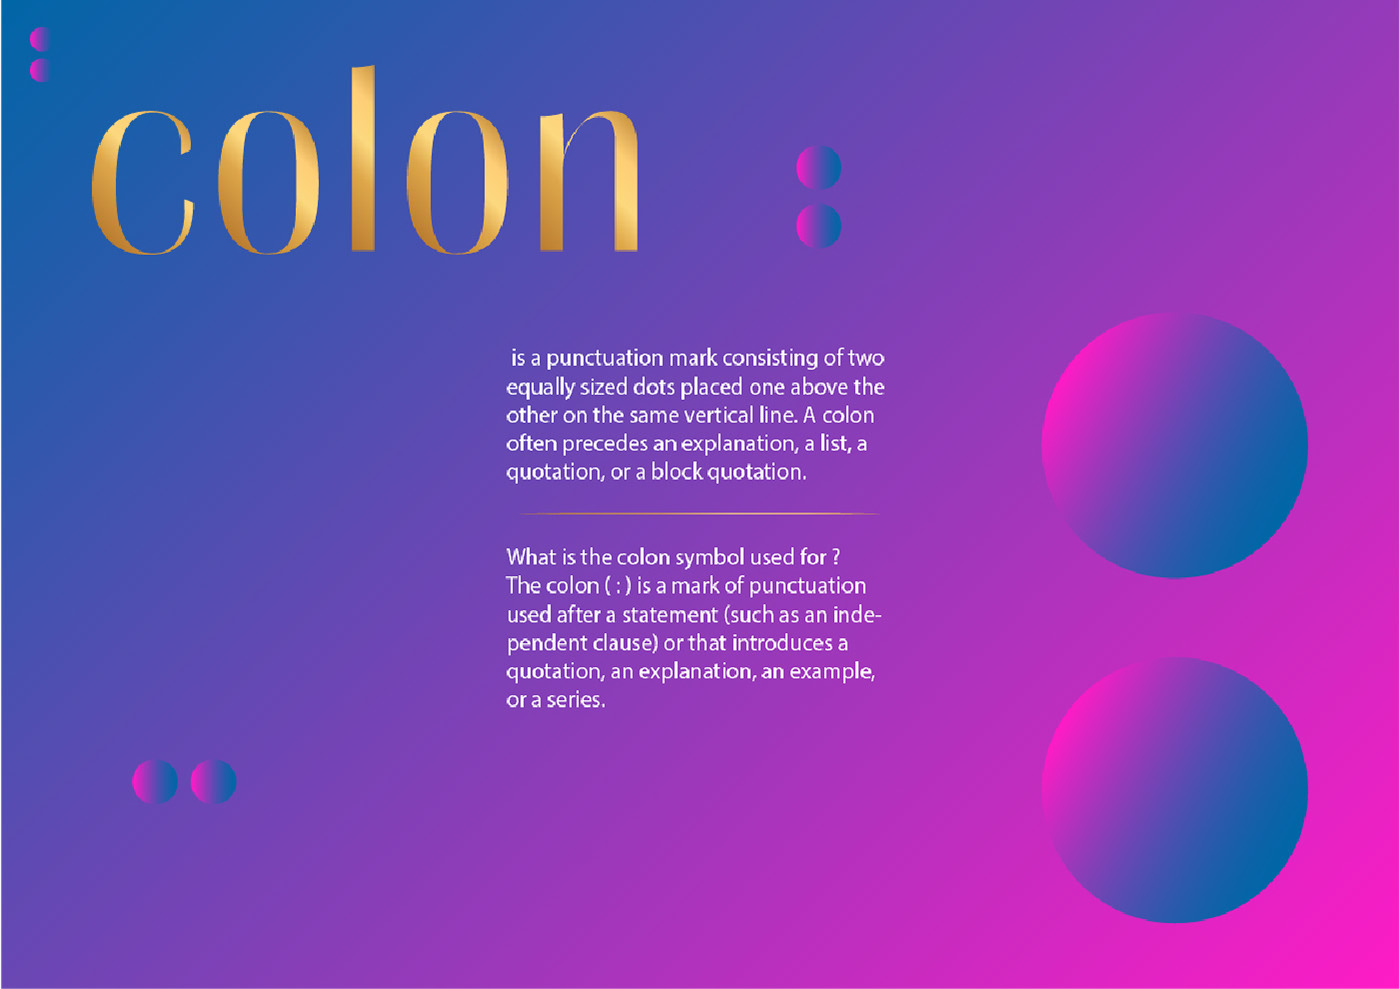 Layout layouts layoutdesign Colon colony typography design typographic colon layout